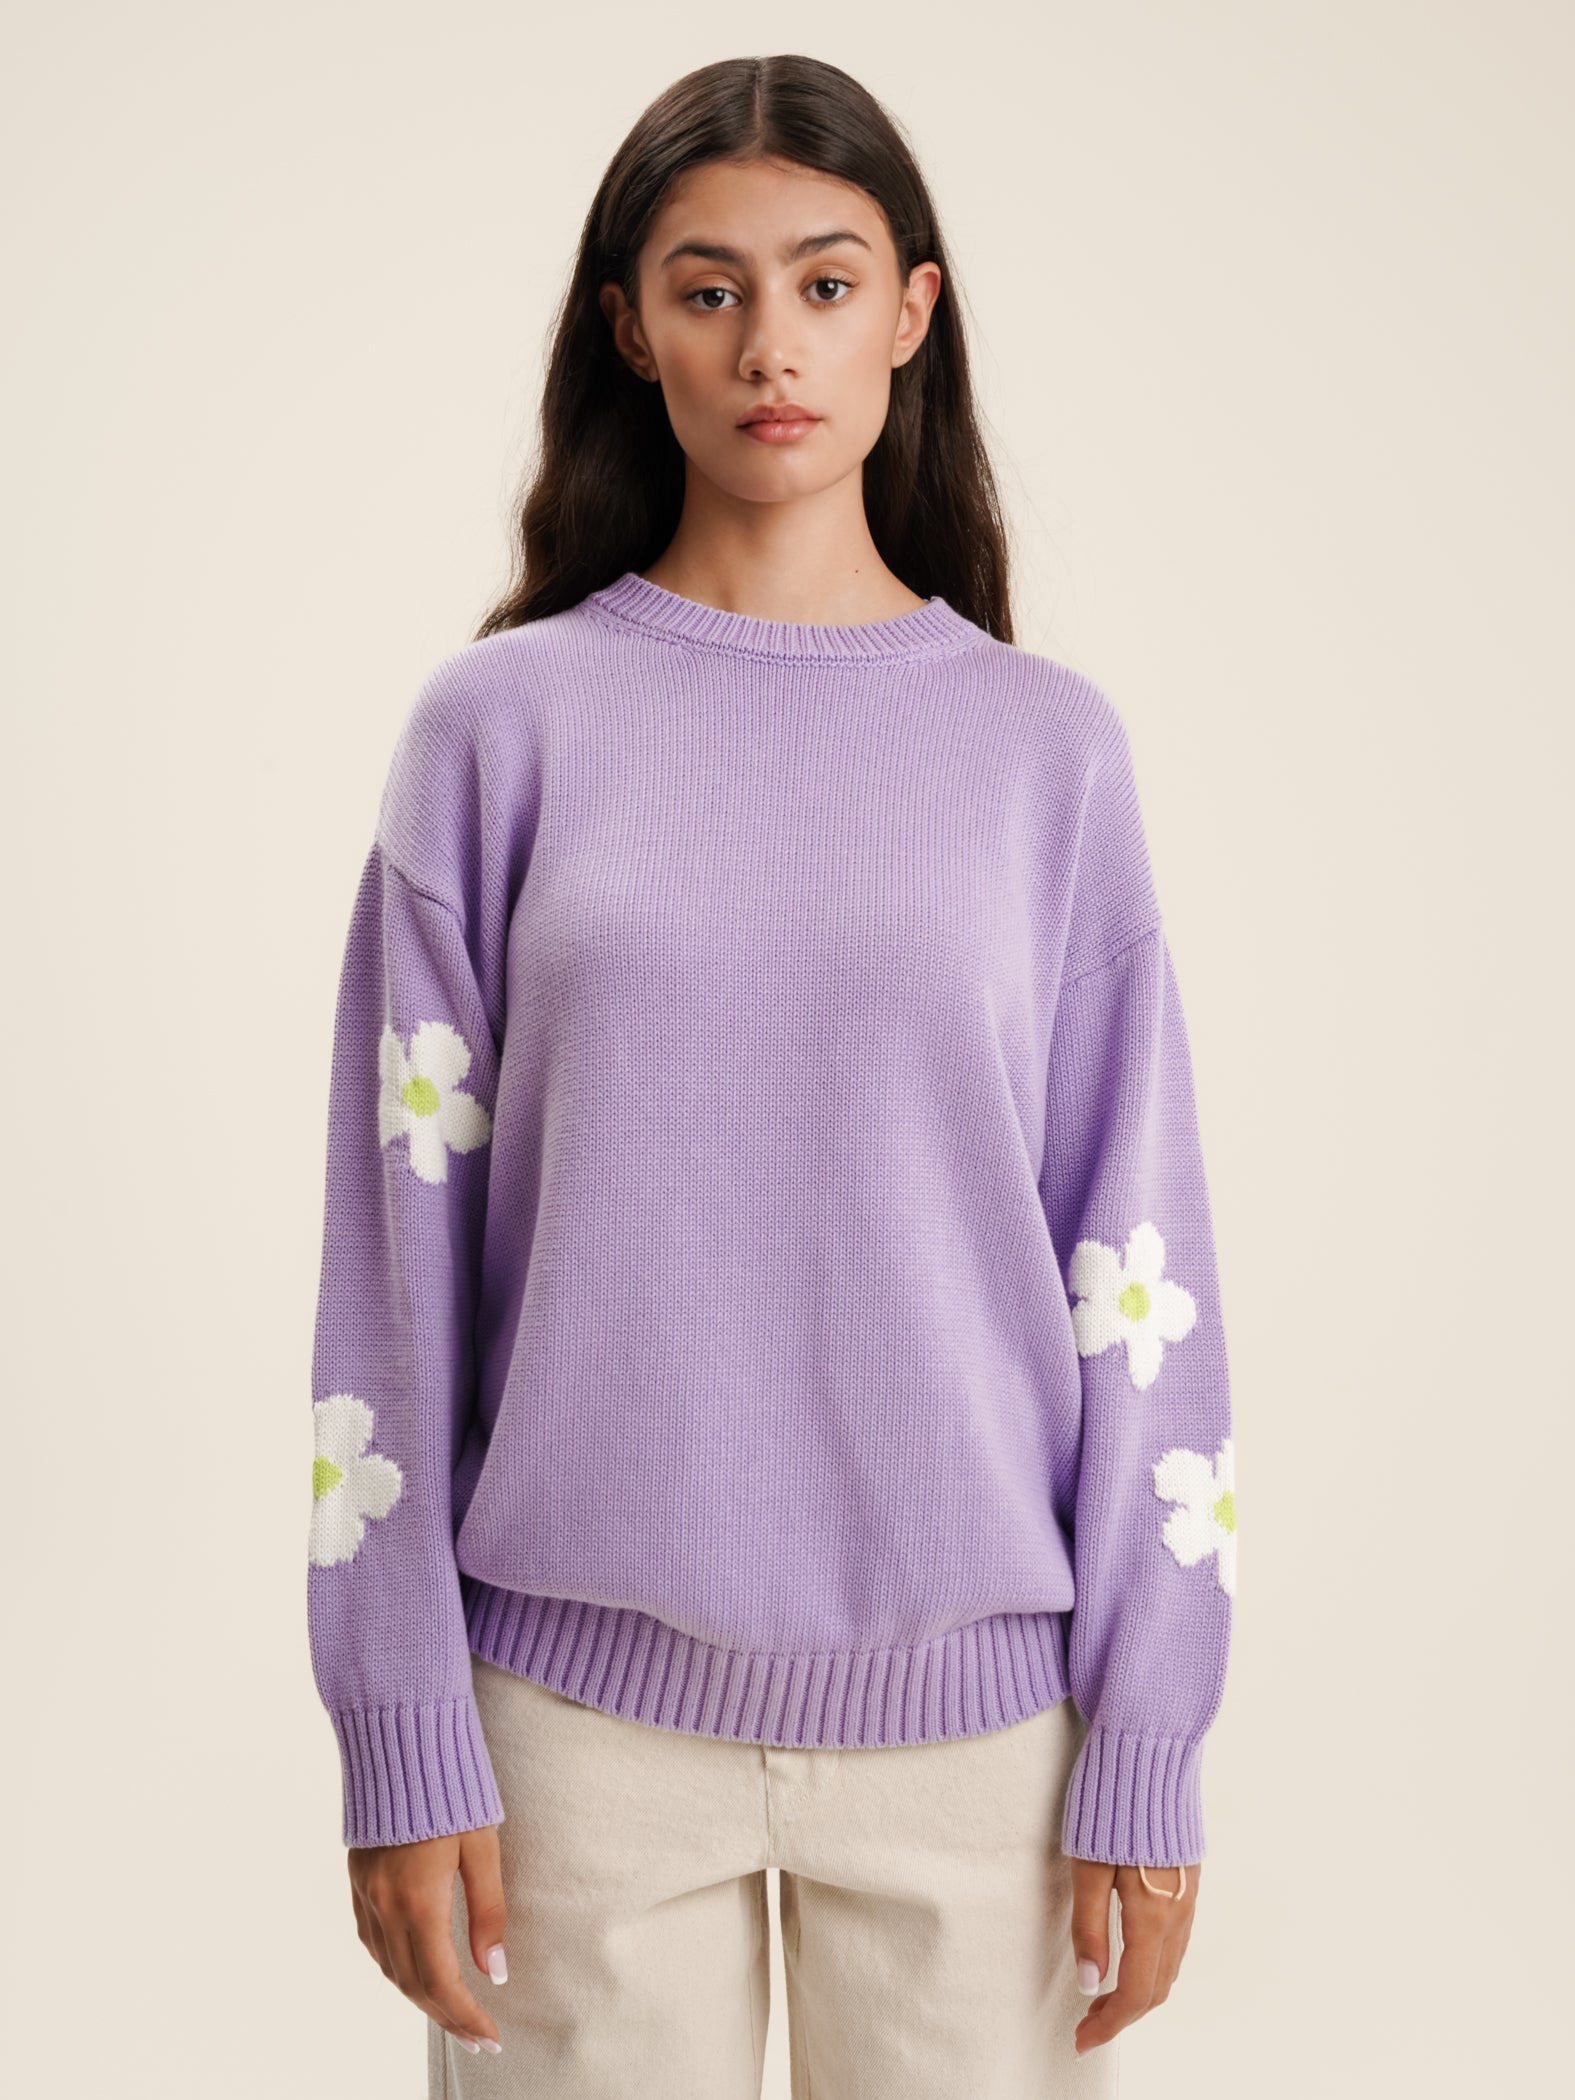 KNITTED DAISY SWEATER IN LILAC – MUSTIQUE